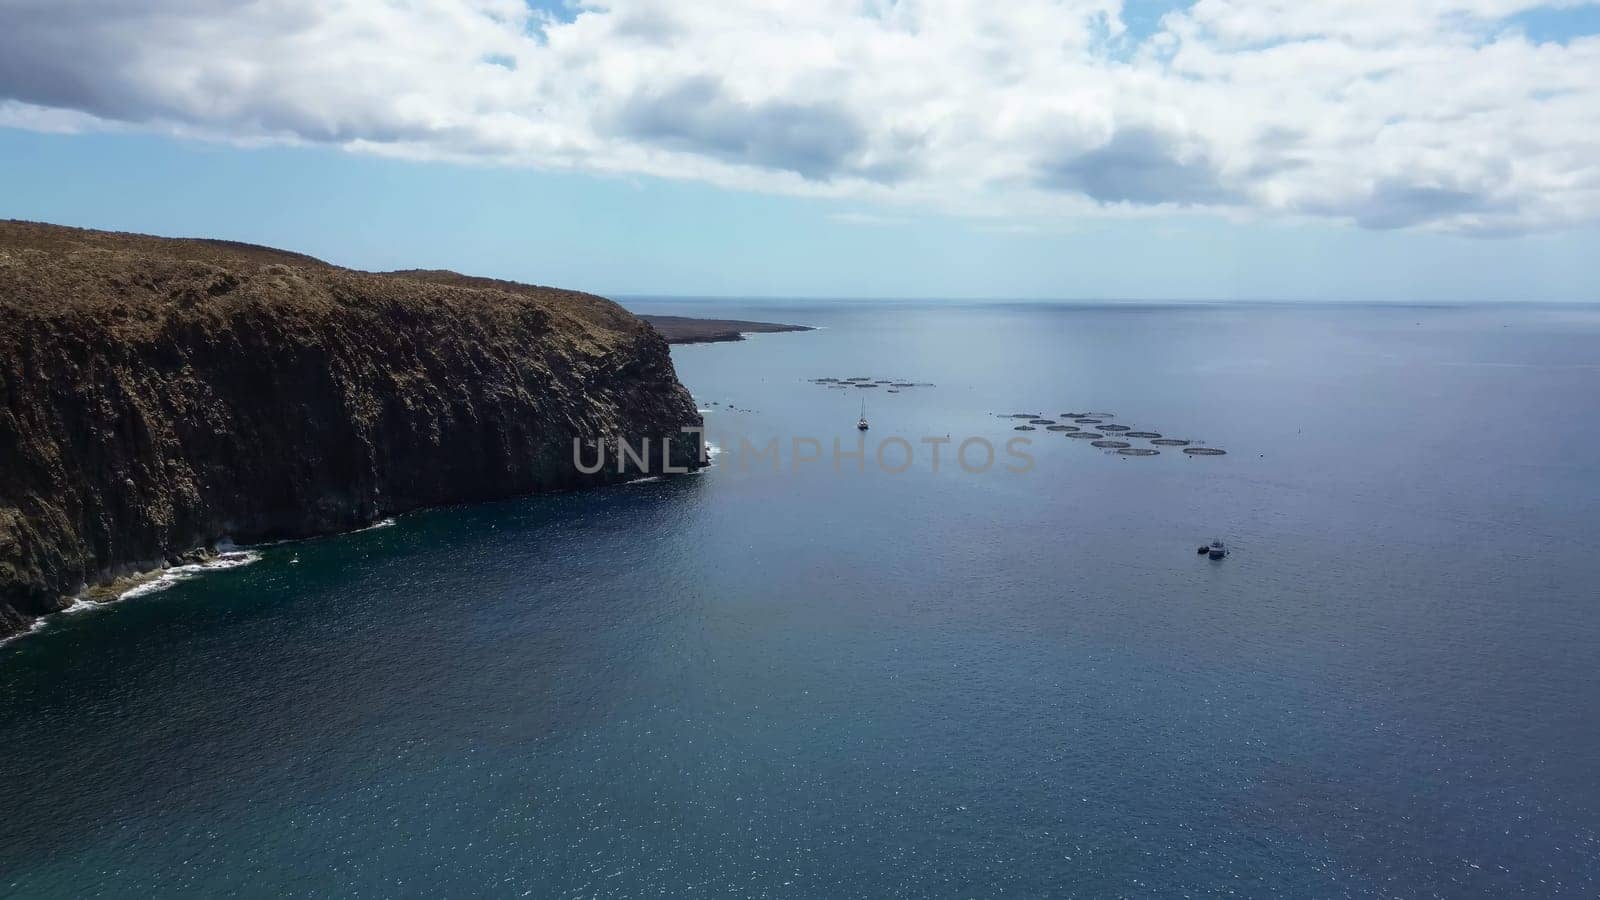 Large rock formations that look like Los Gigantes right on the atlantic ocean on the Canary Island of Tenerife. by MP_foto71